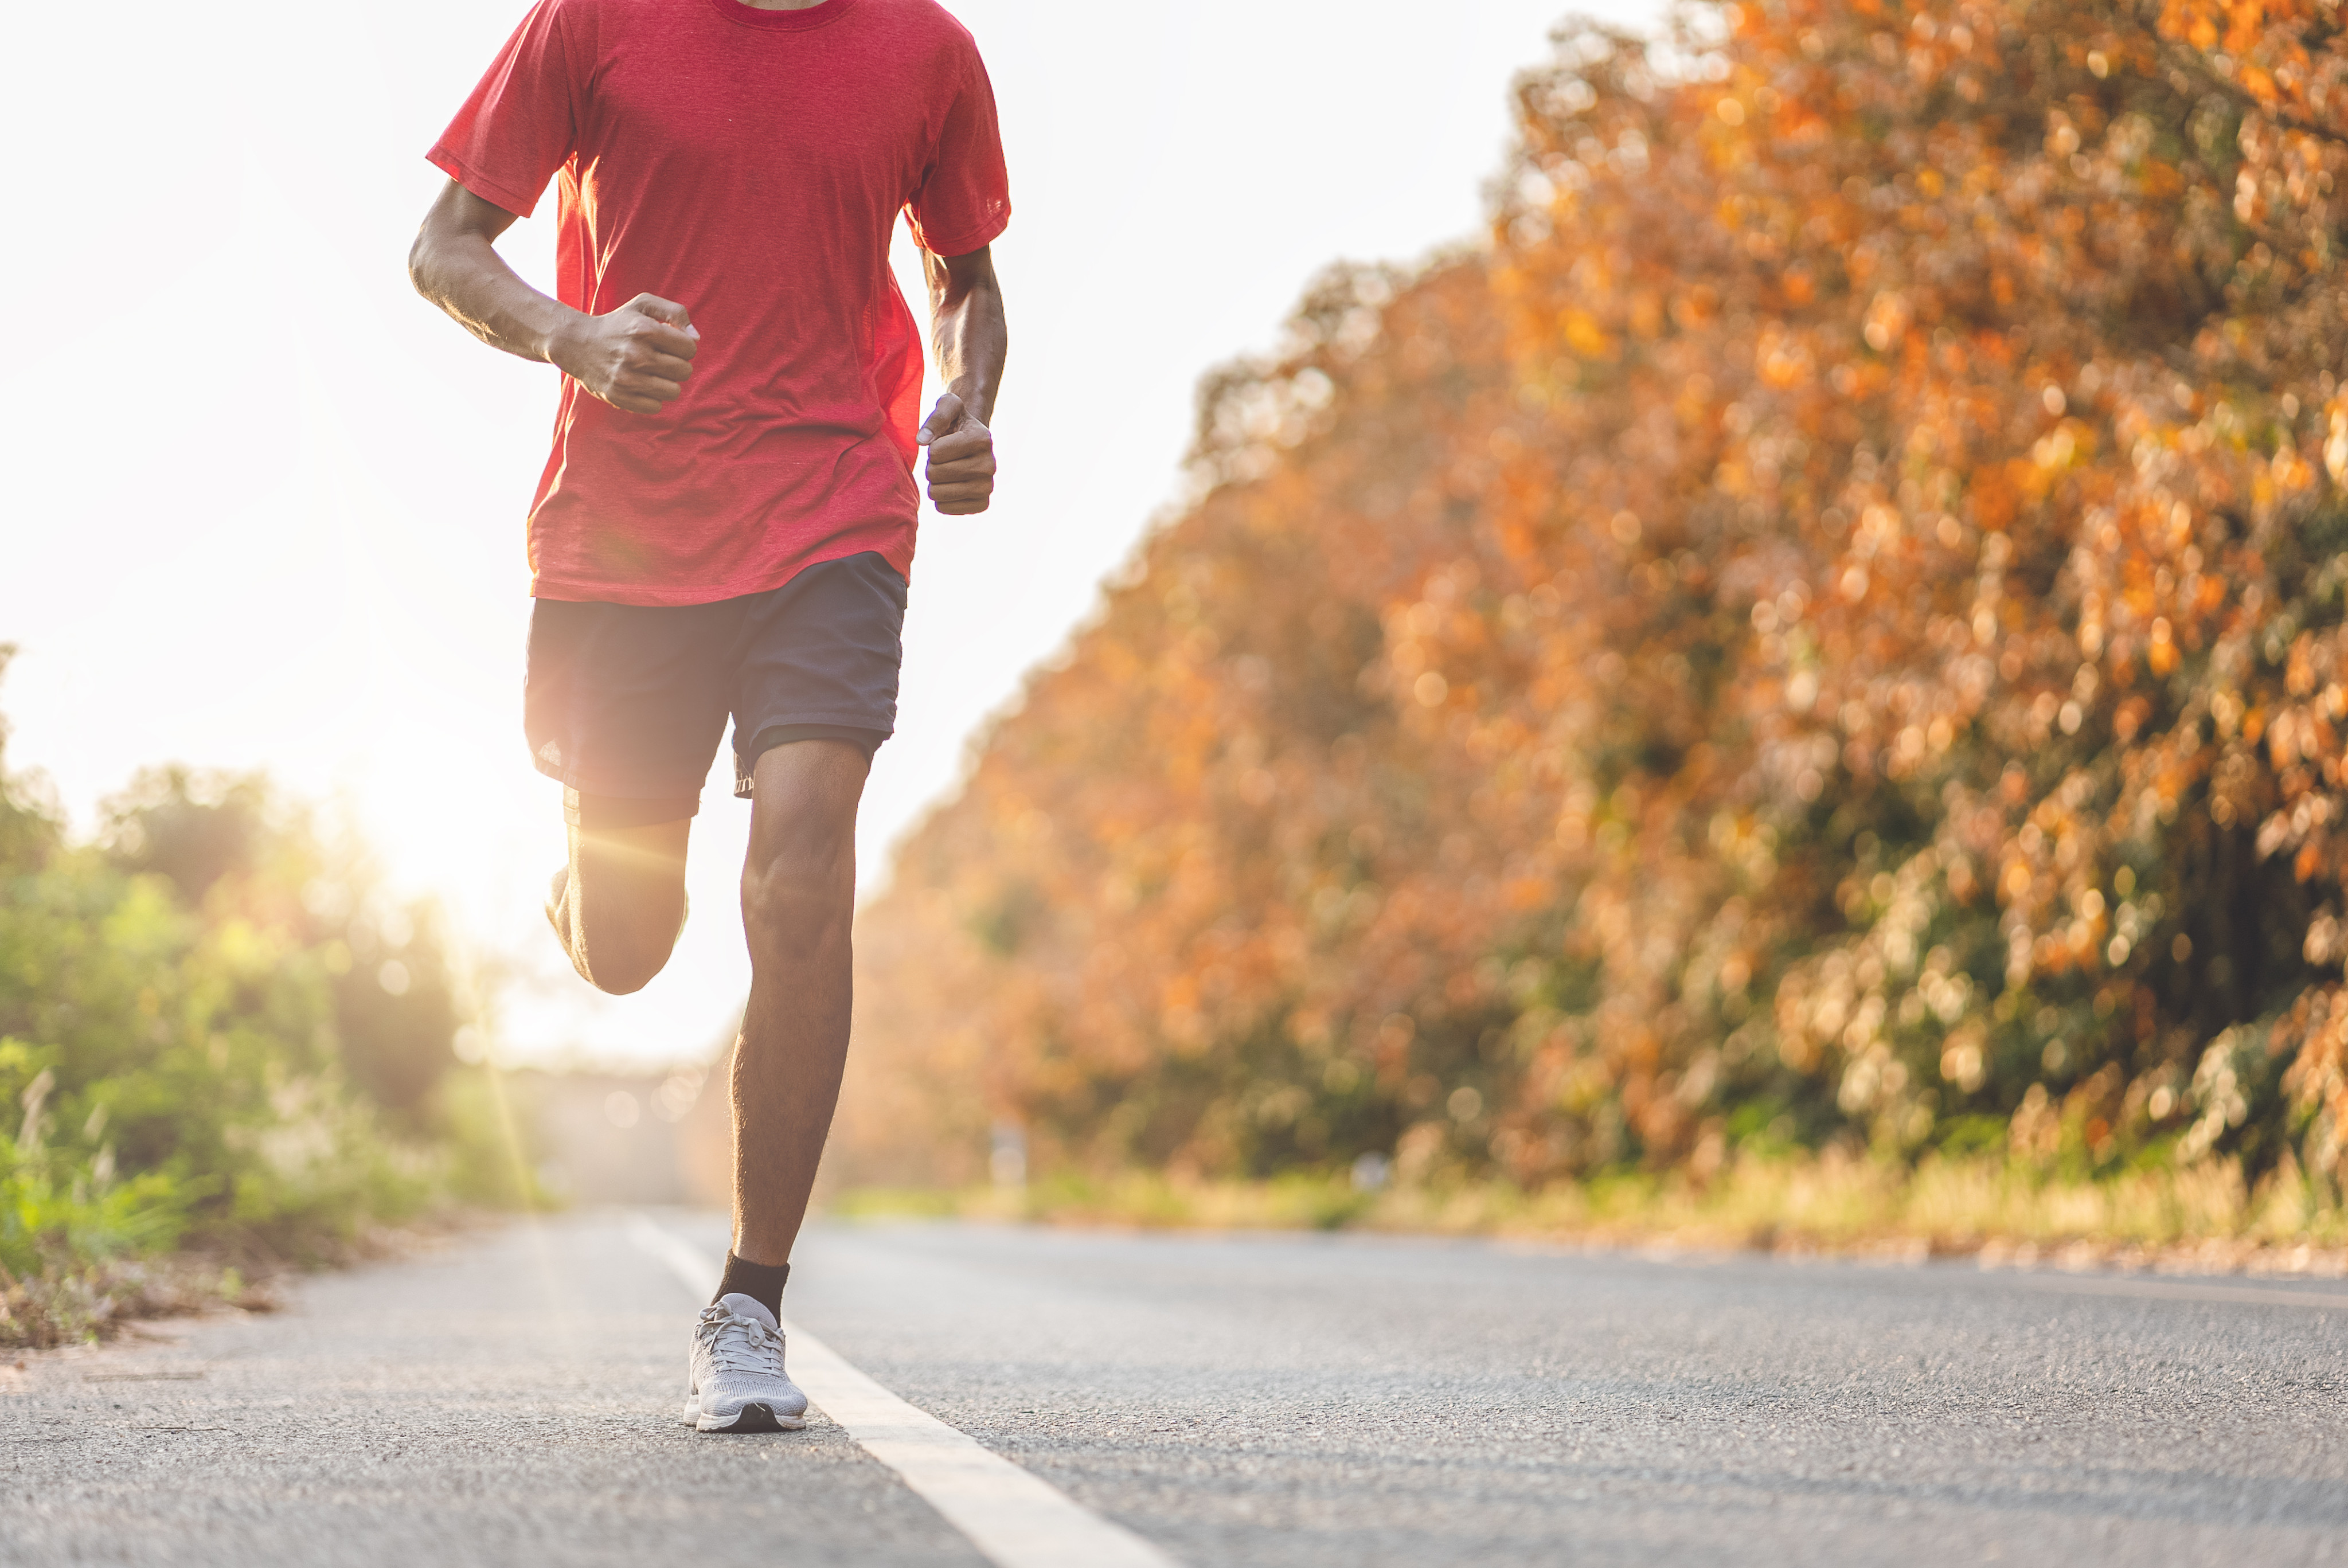 There are a variety of factors that determine the amount of calories burned during running. Photo: Shutterstock Images